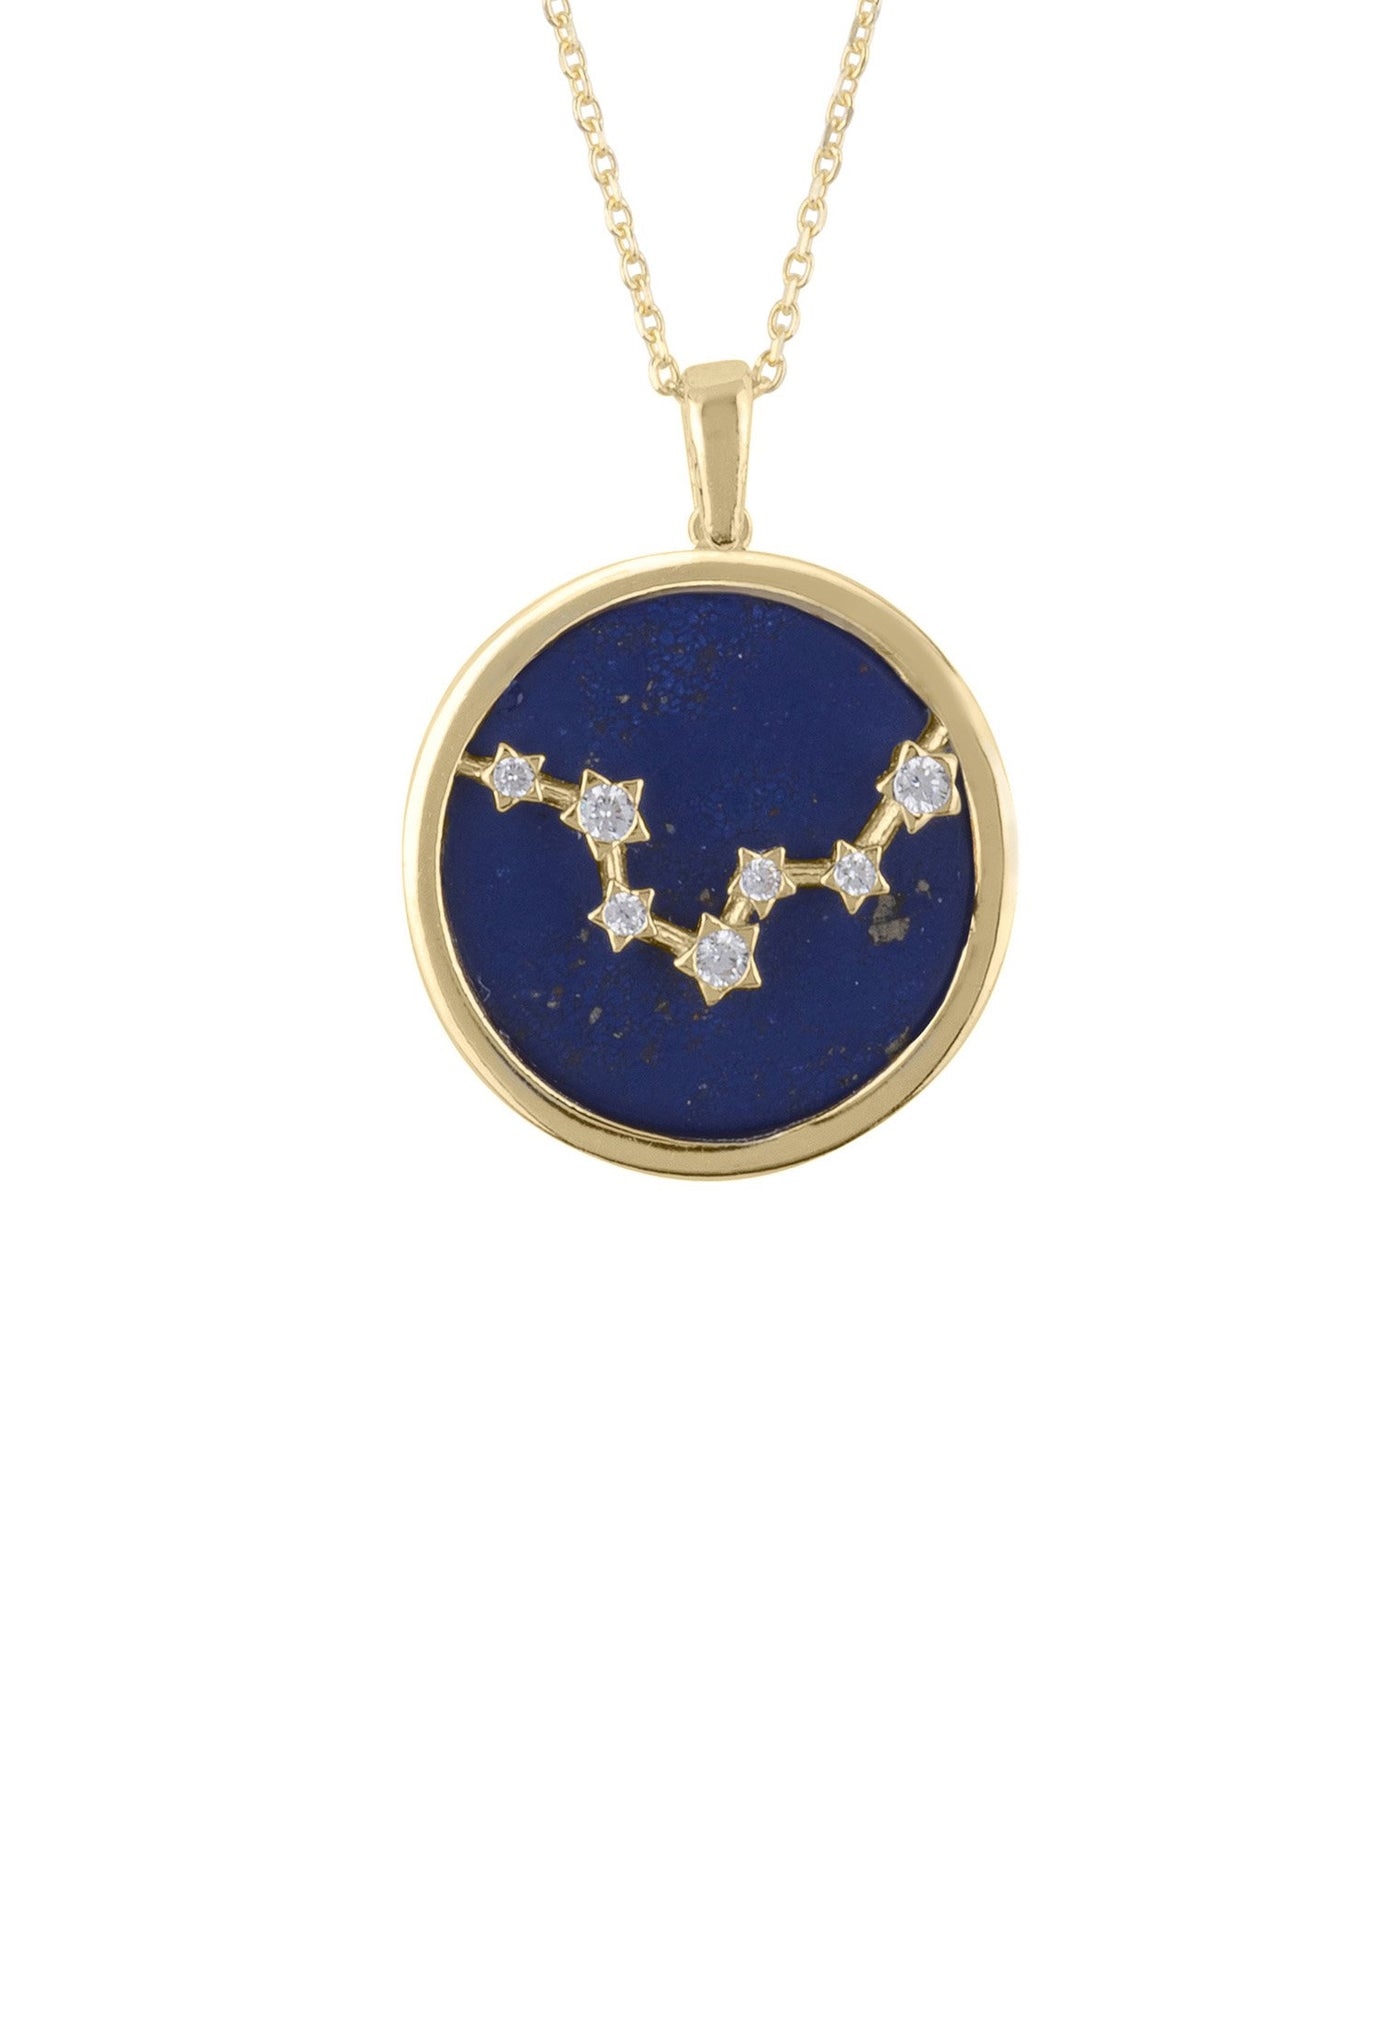 Pisces - necklace - 22 carat gold plated - lapis lazuli with white zirconia